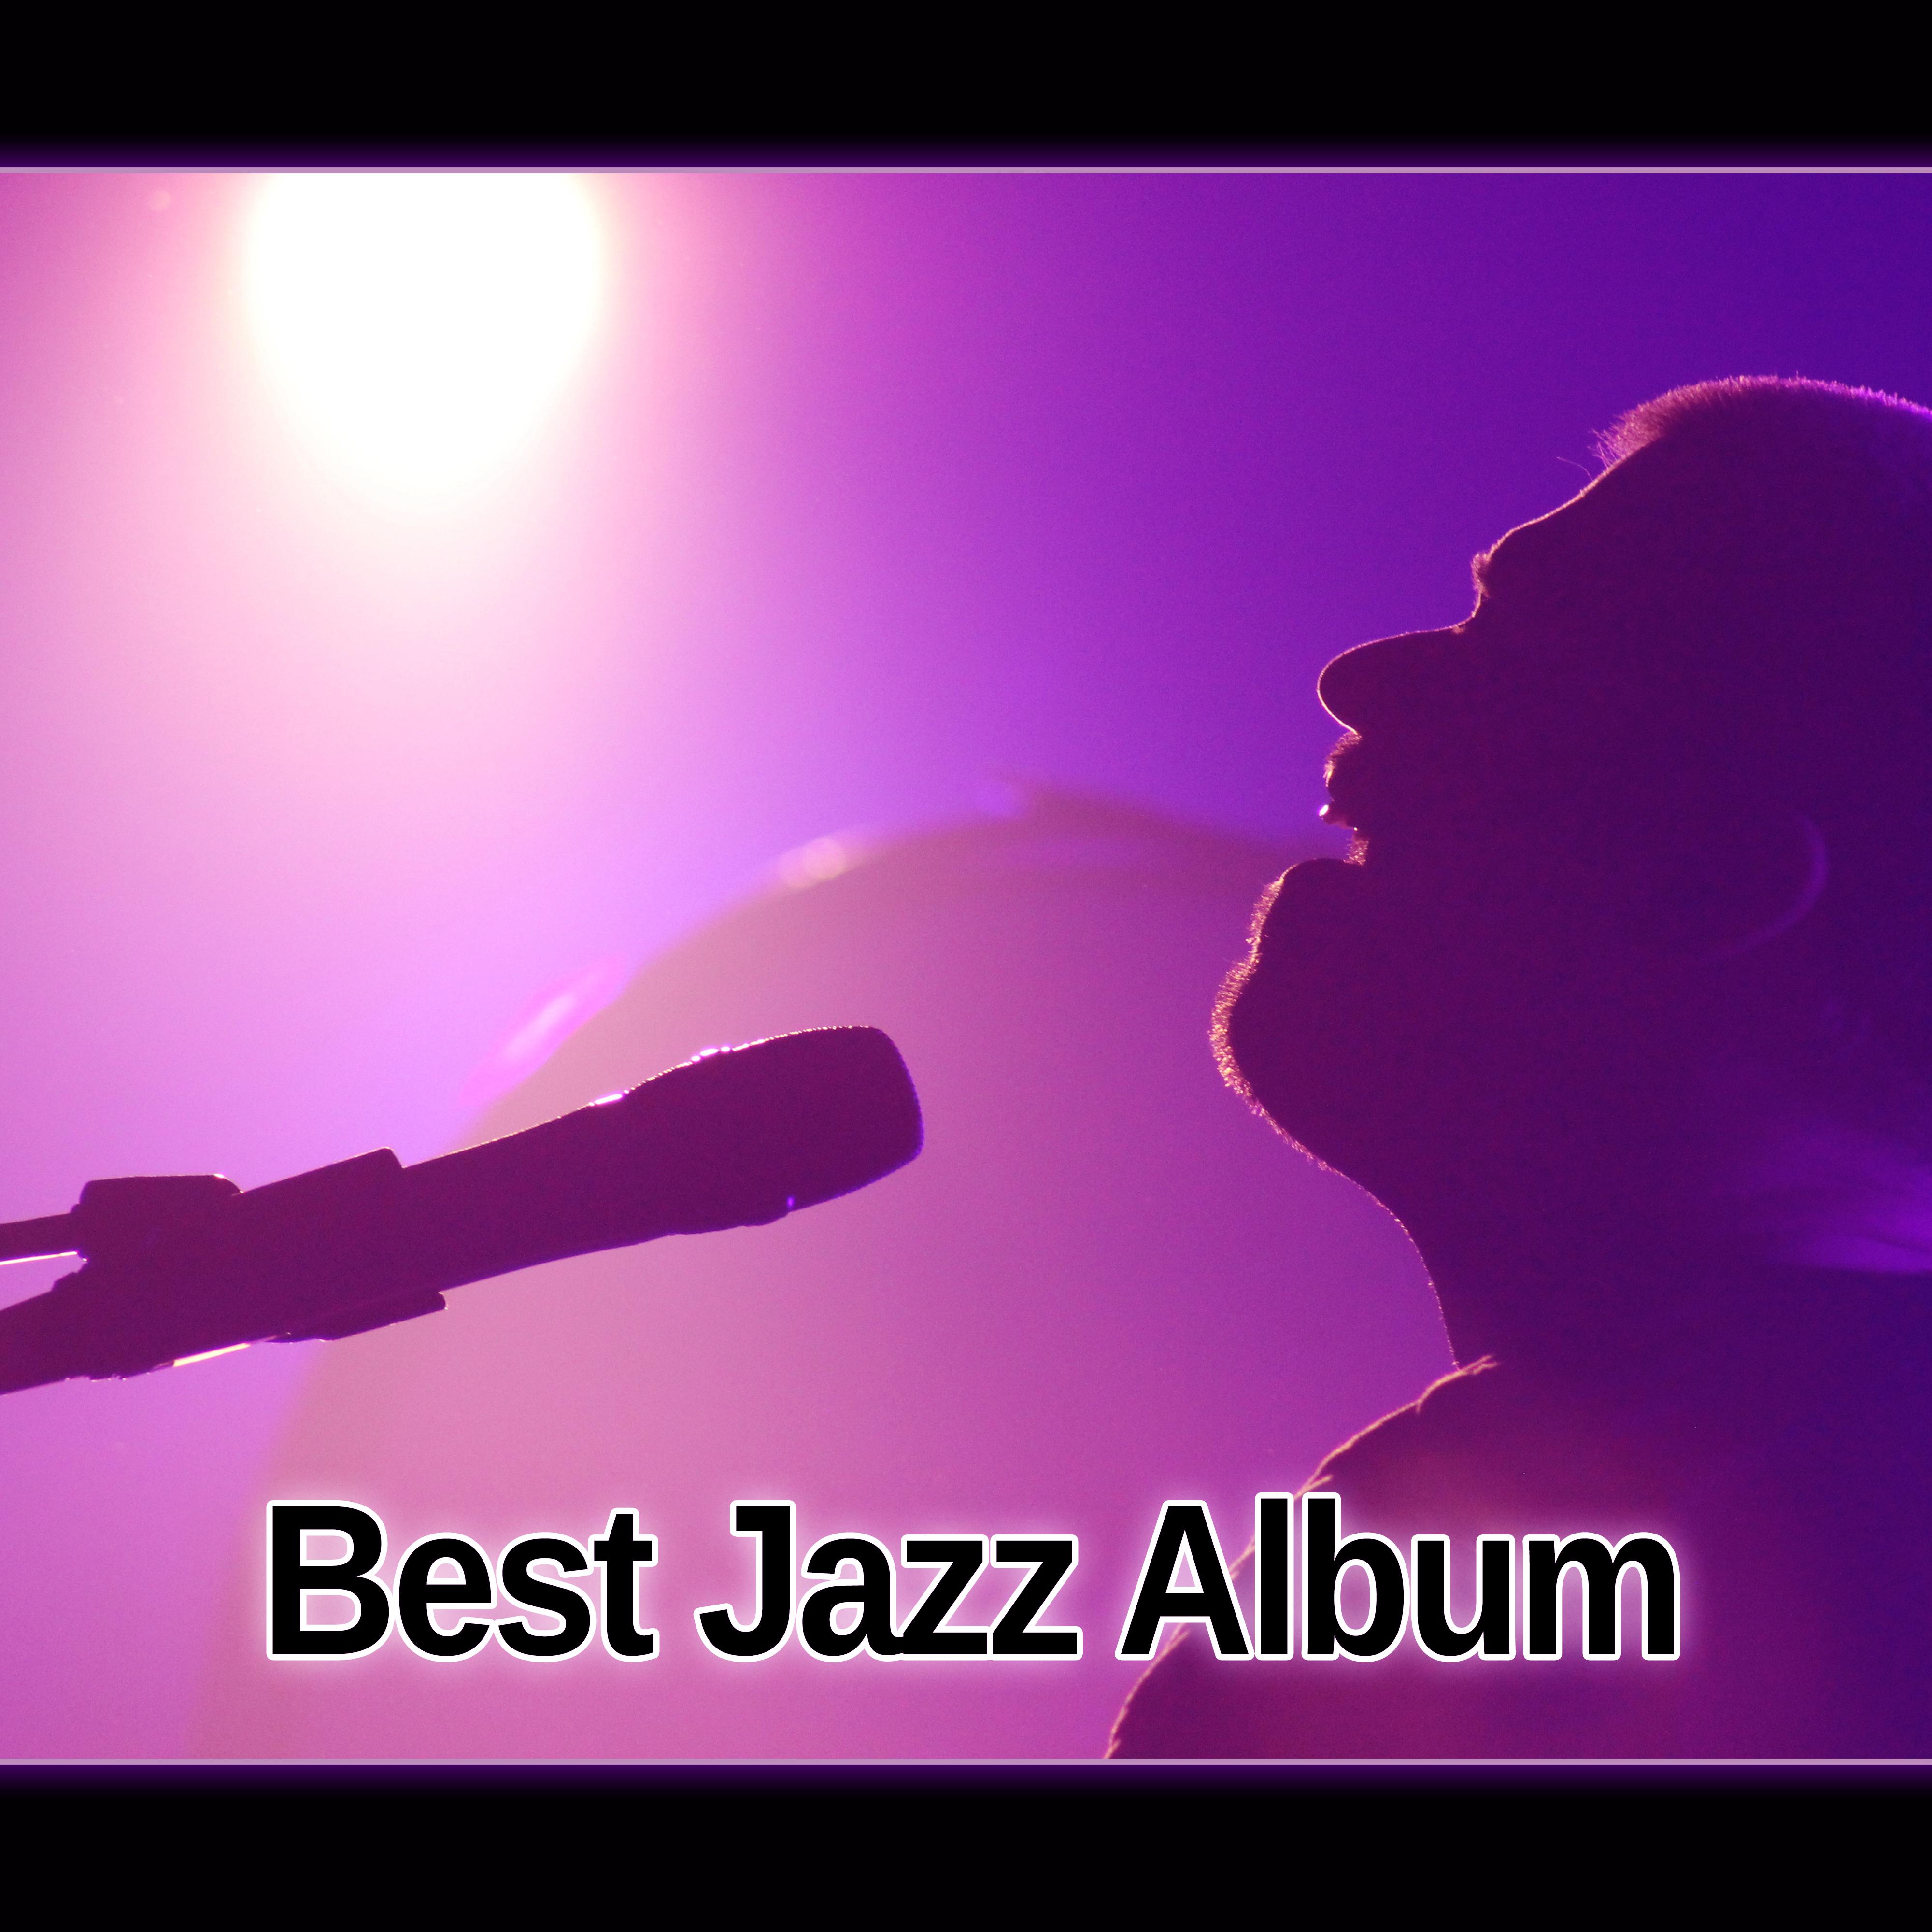 Best Jazz Album  Smooth Piano Bar, Mellow Jazz Sounds, Soothing Melodies, Moody Jazz, Background Music